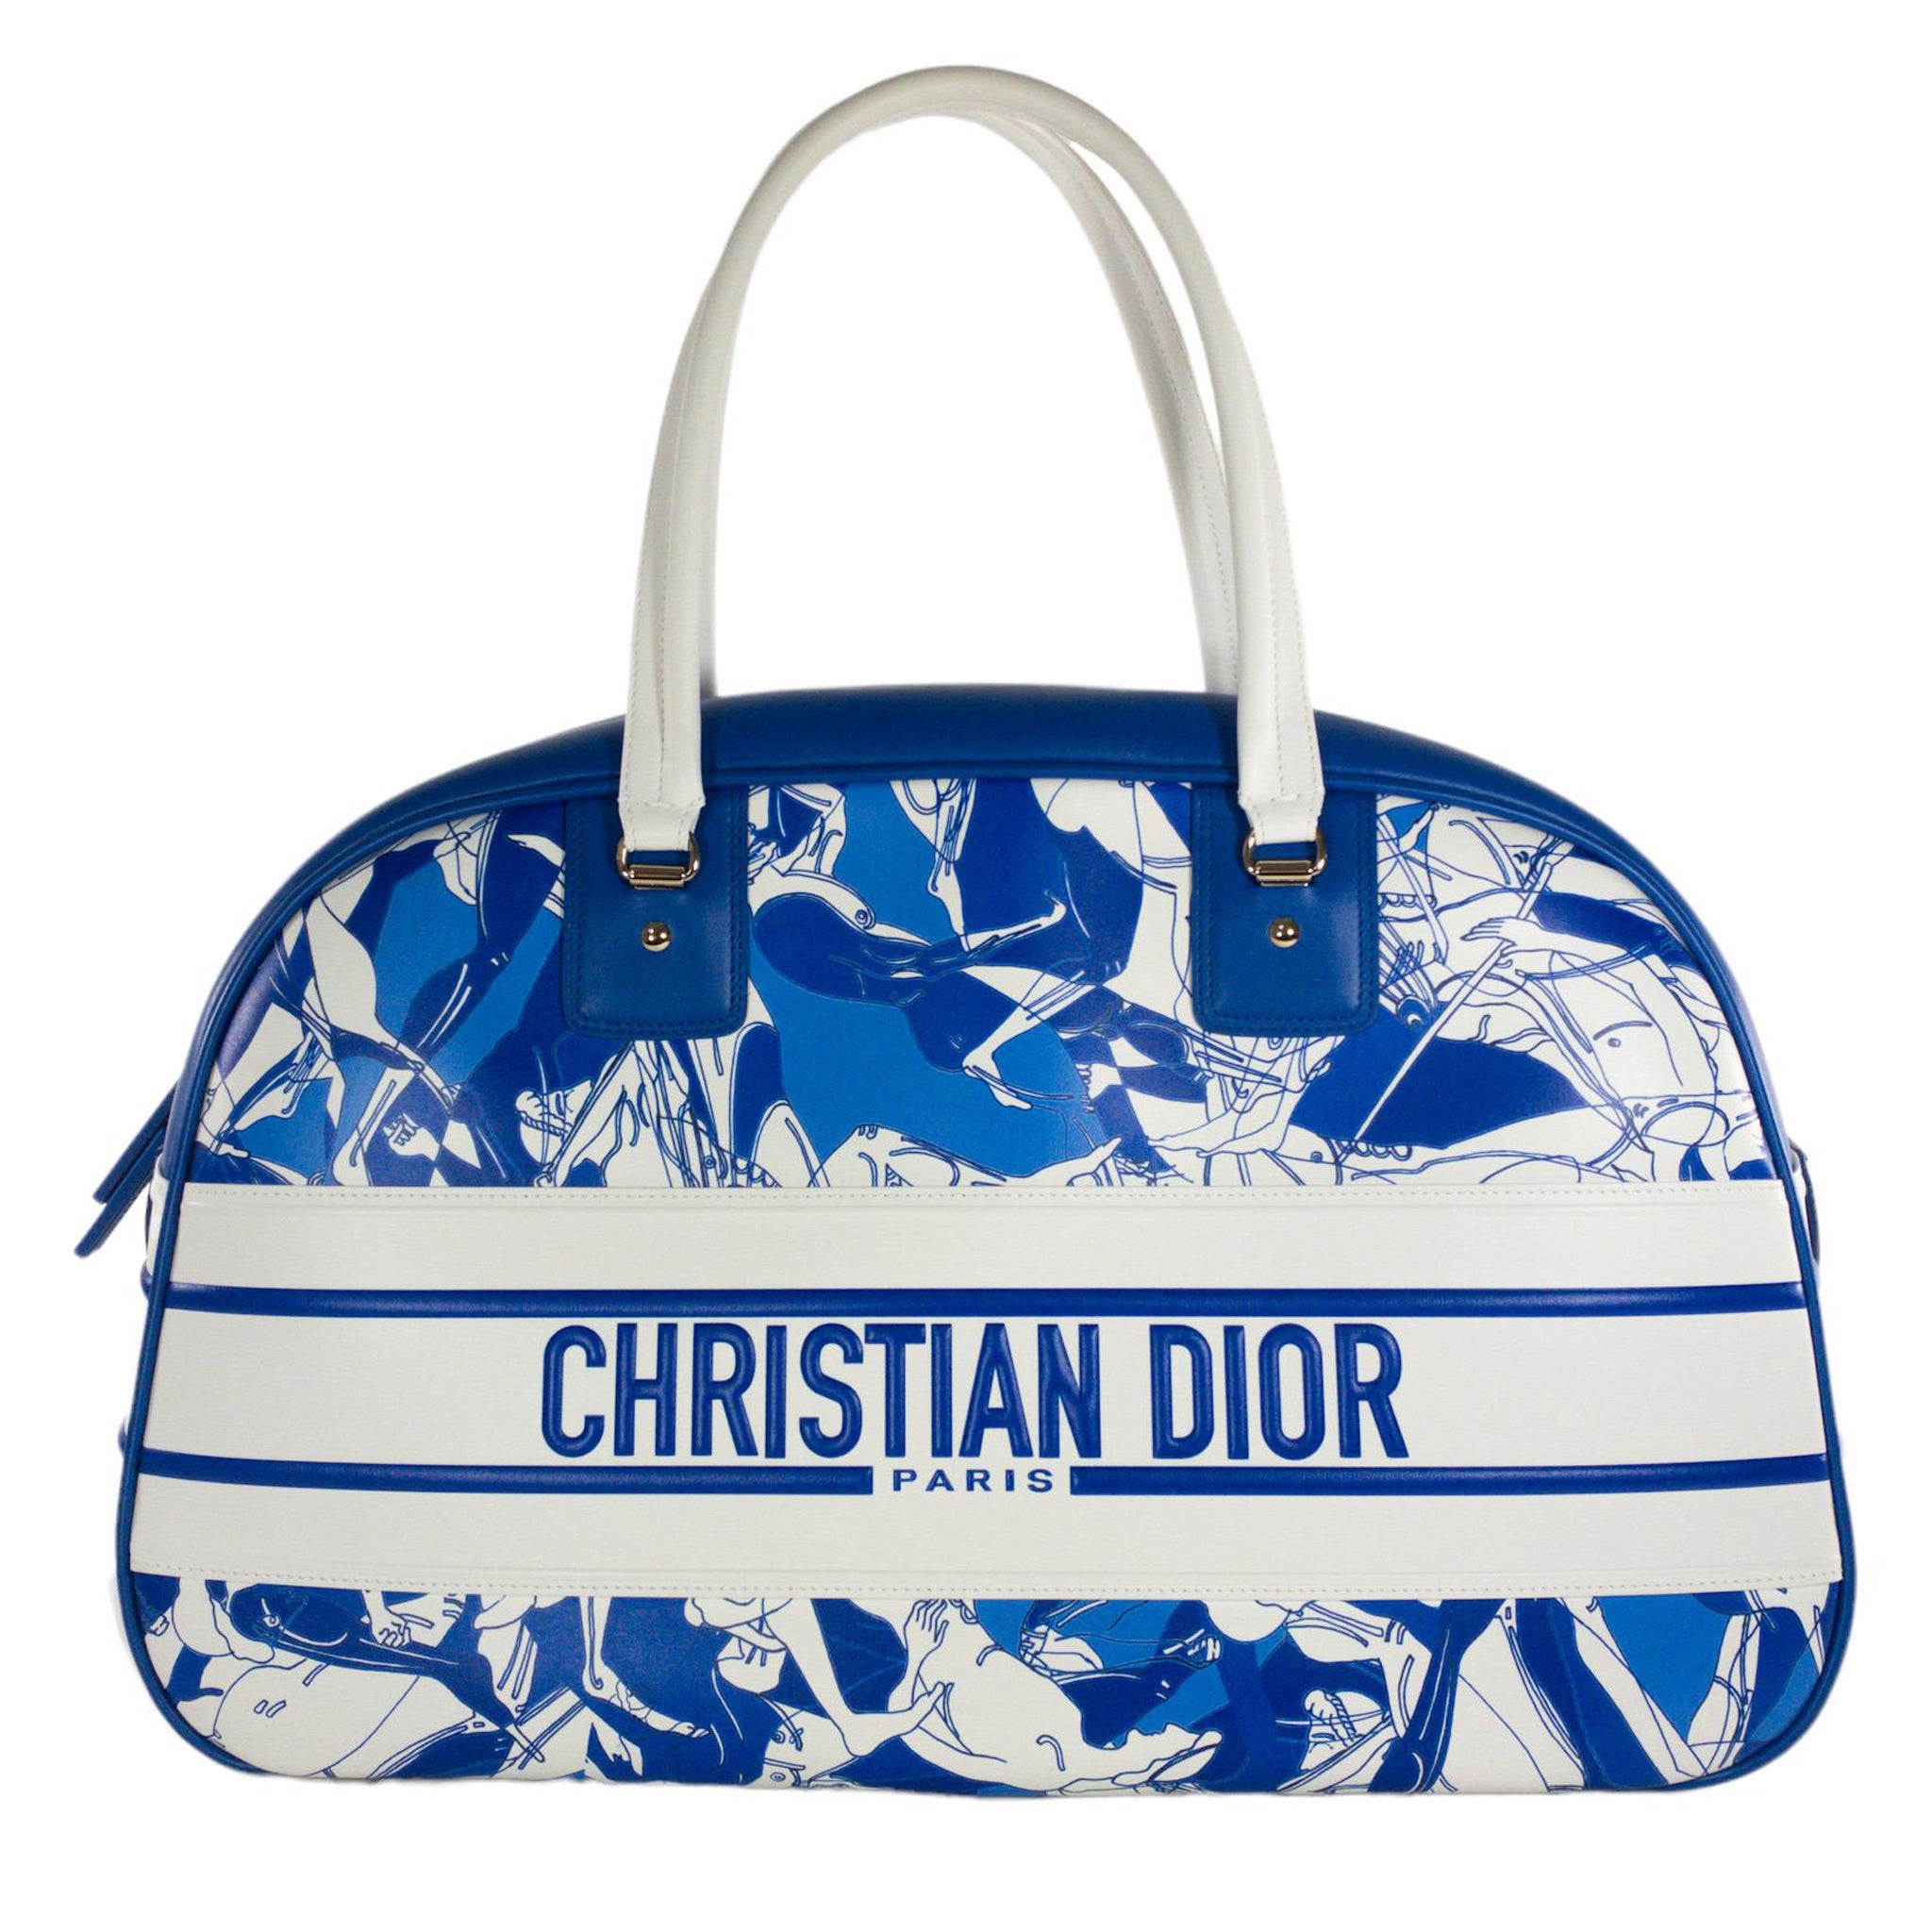 Dior Is Set To Promote It's Bowling Bag This Coming Year: Will